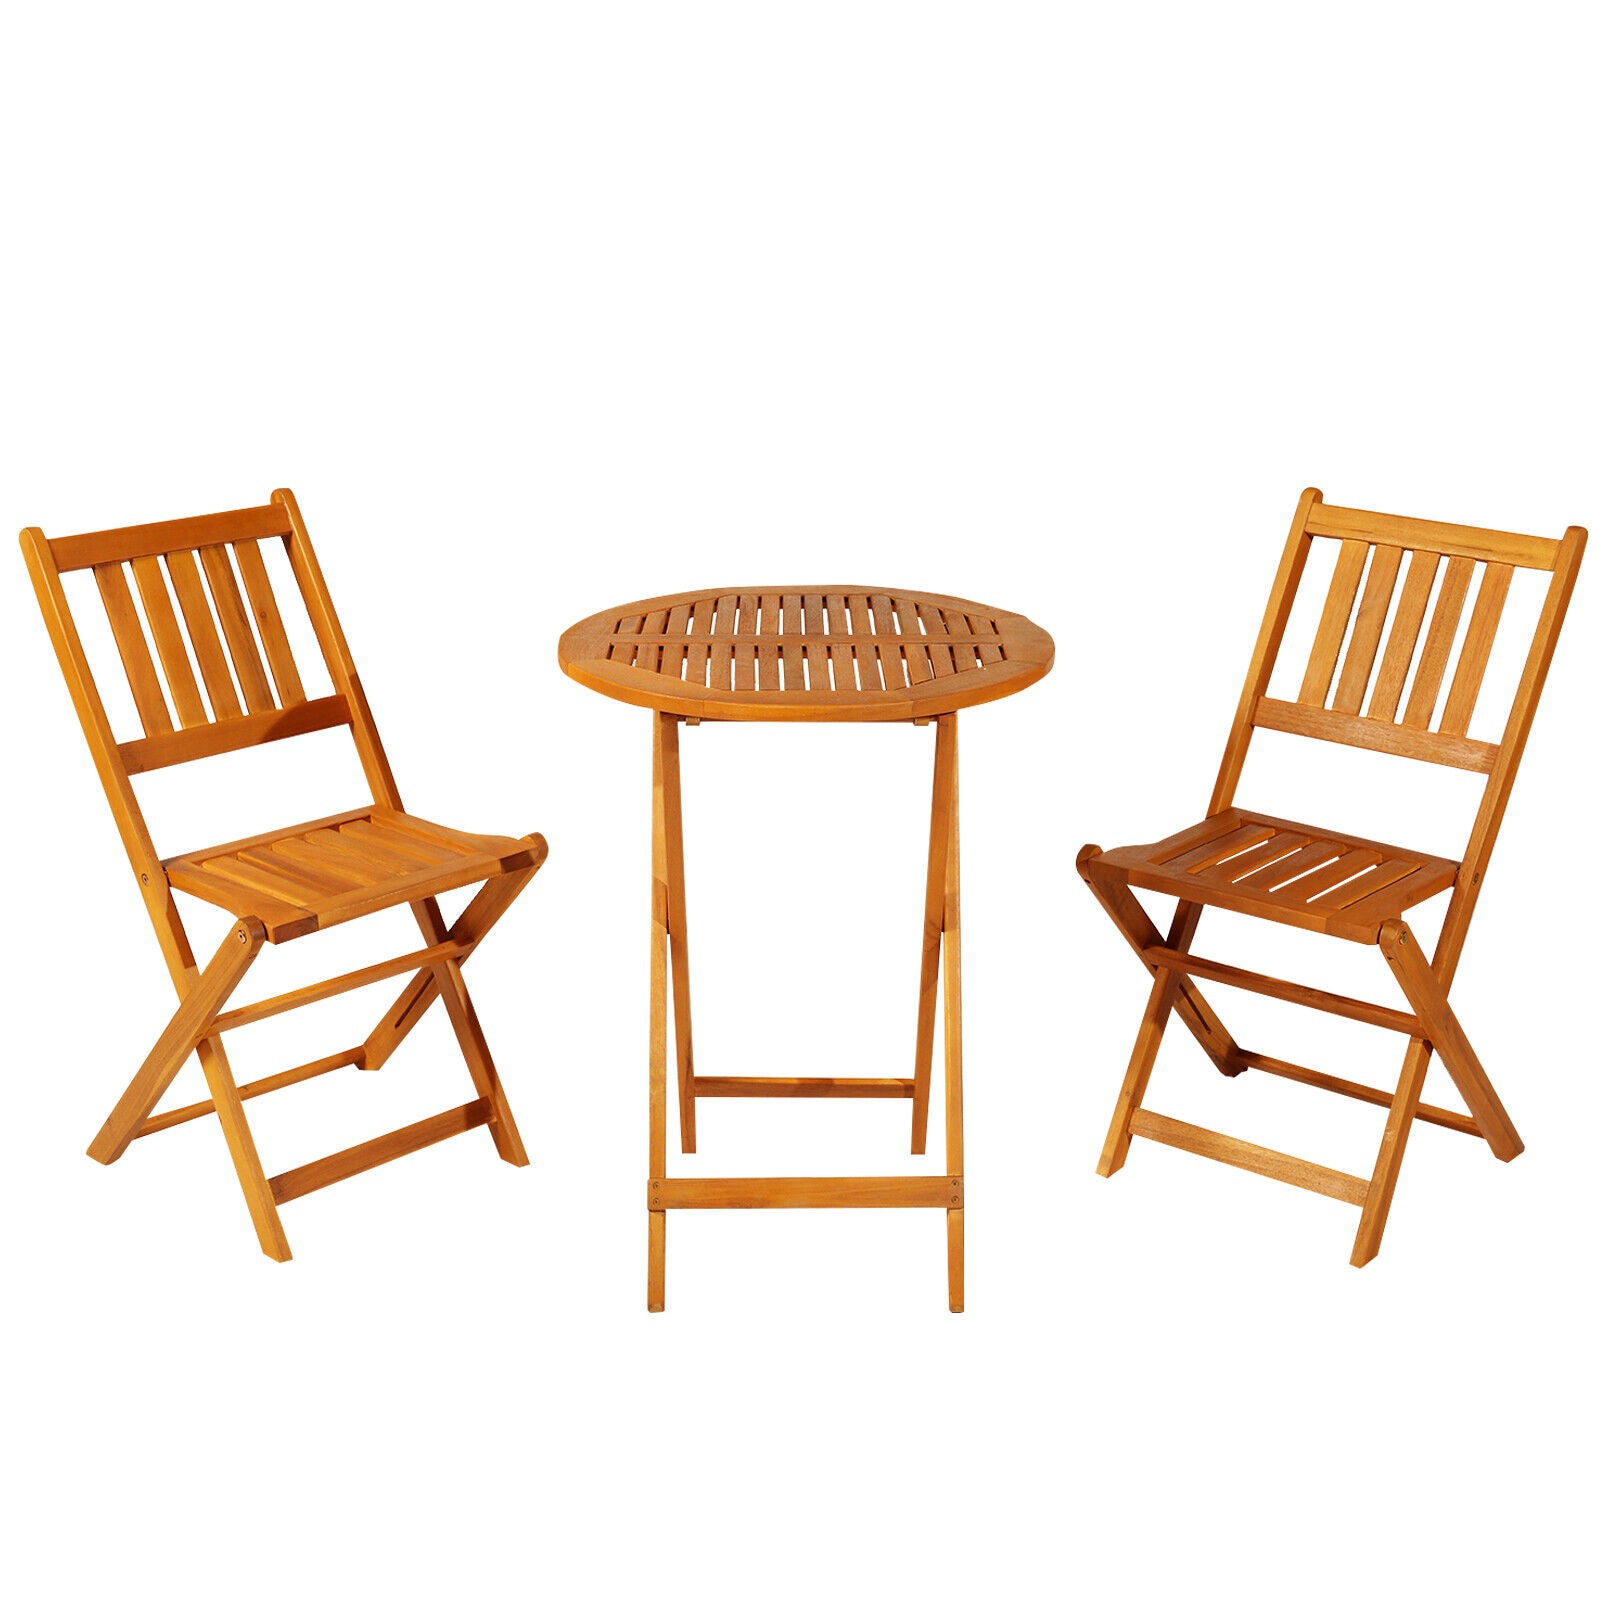 Bistro Set - 3 Piece Acacia Wood Bistro Table And Chairs